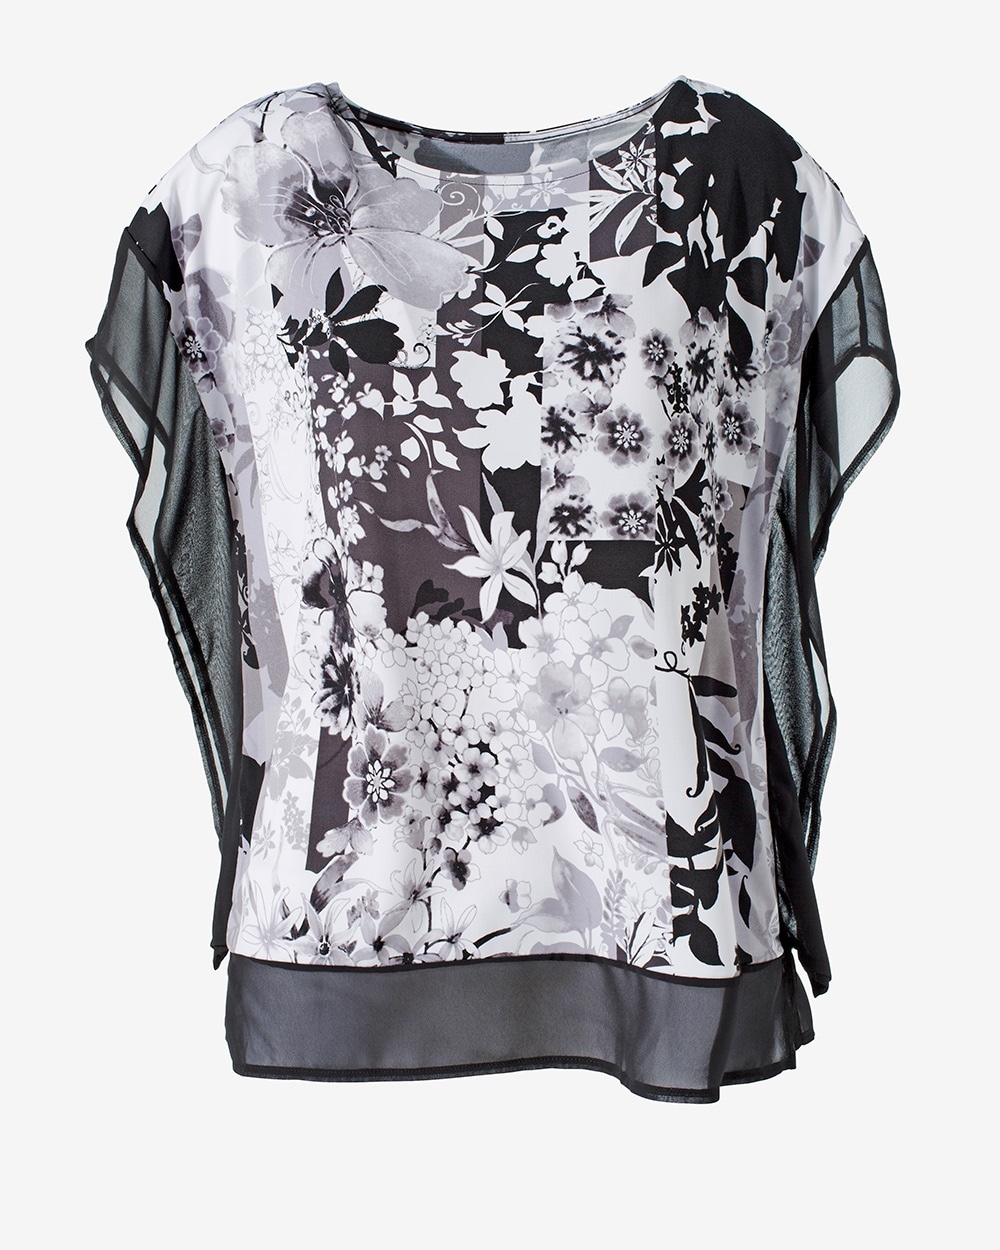 Easywear South Side Floral Tee